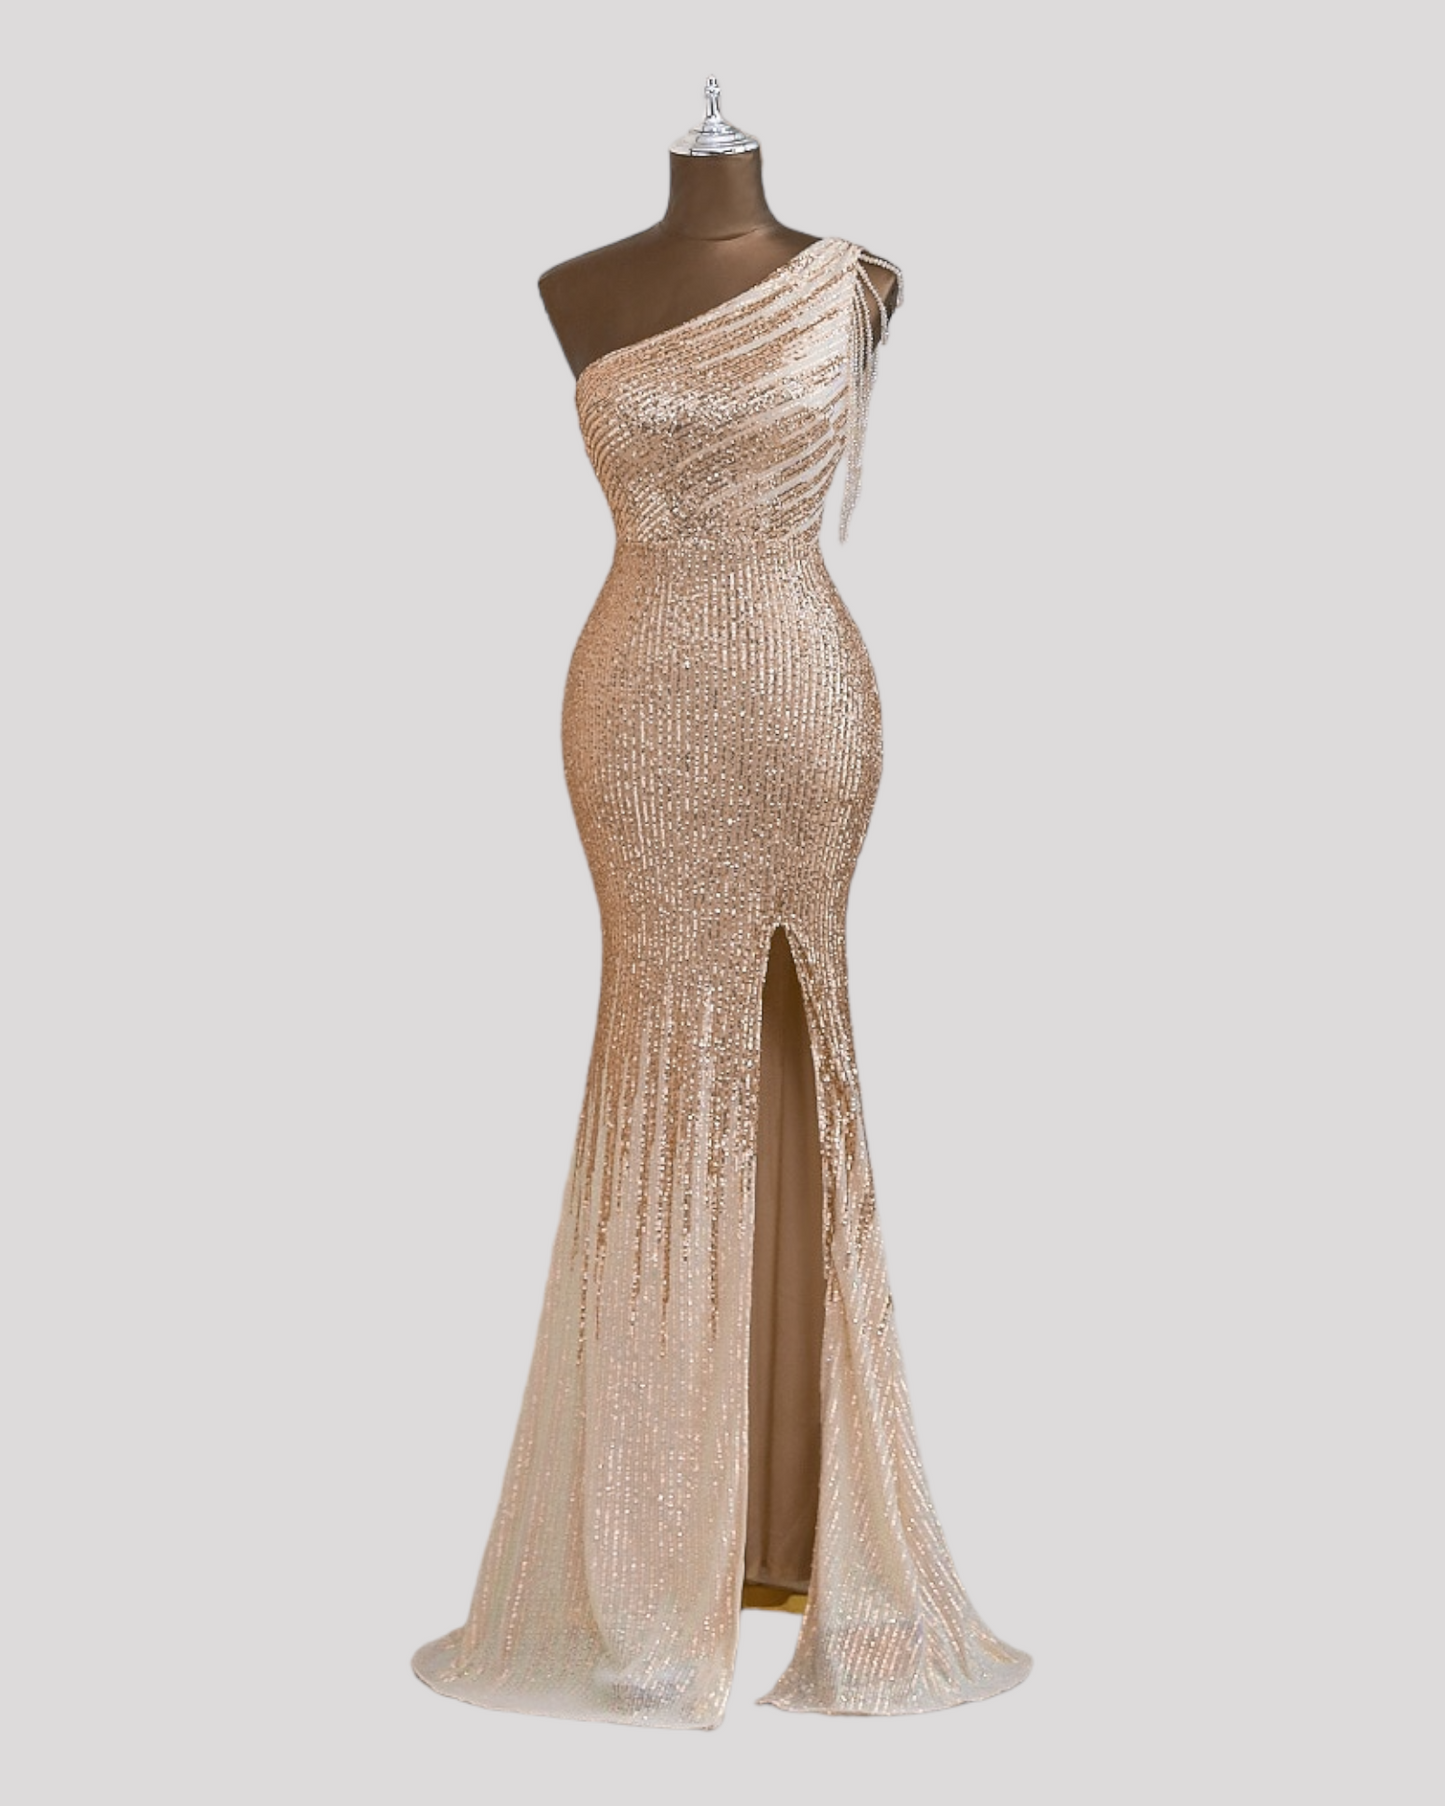 One Shoulder Evening Dress in a 2 Tone Sequin Fabric with Shoulder Beading Draping, Available in 6 colours